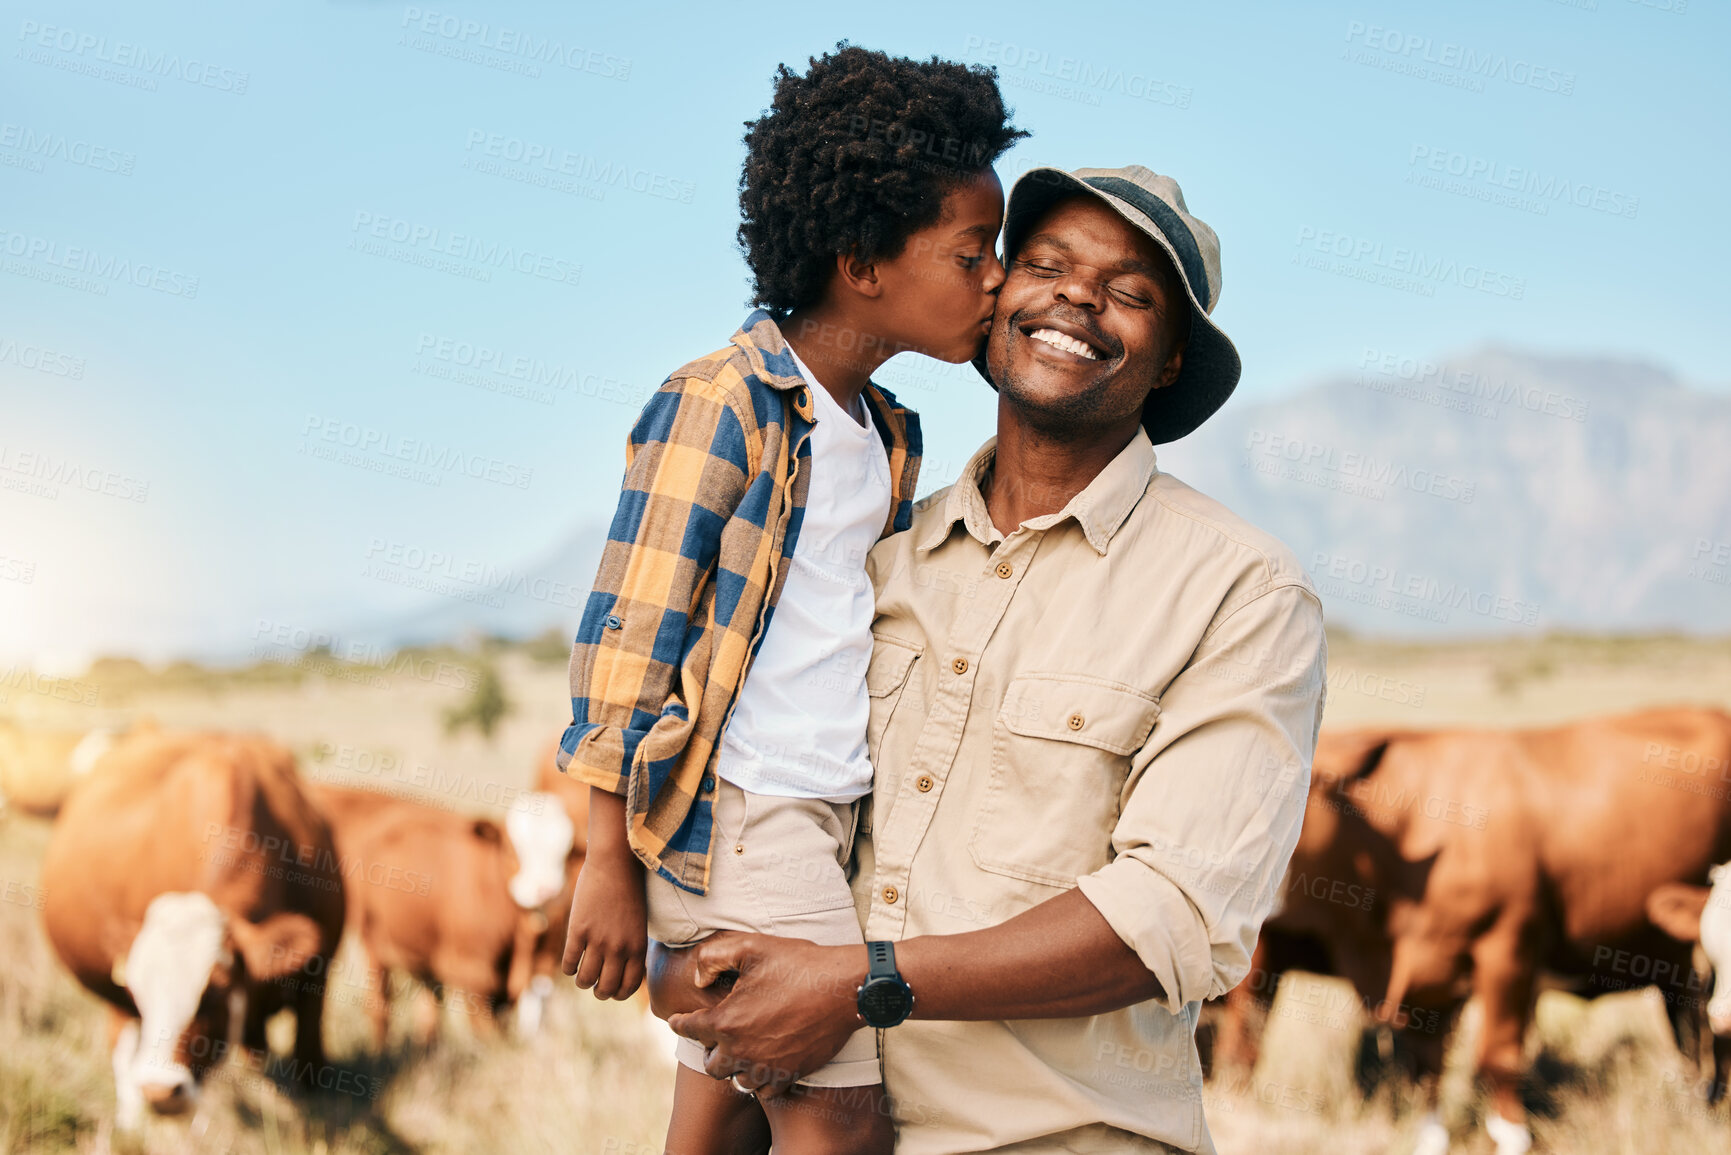 Buy stock photo Farm, cows and child kiss father in countryside for ecology, adventure and agriculture. Family, sustainable farming and African dad happy with boy embrace for bonding, relax and learning with animals